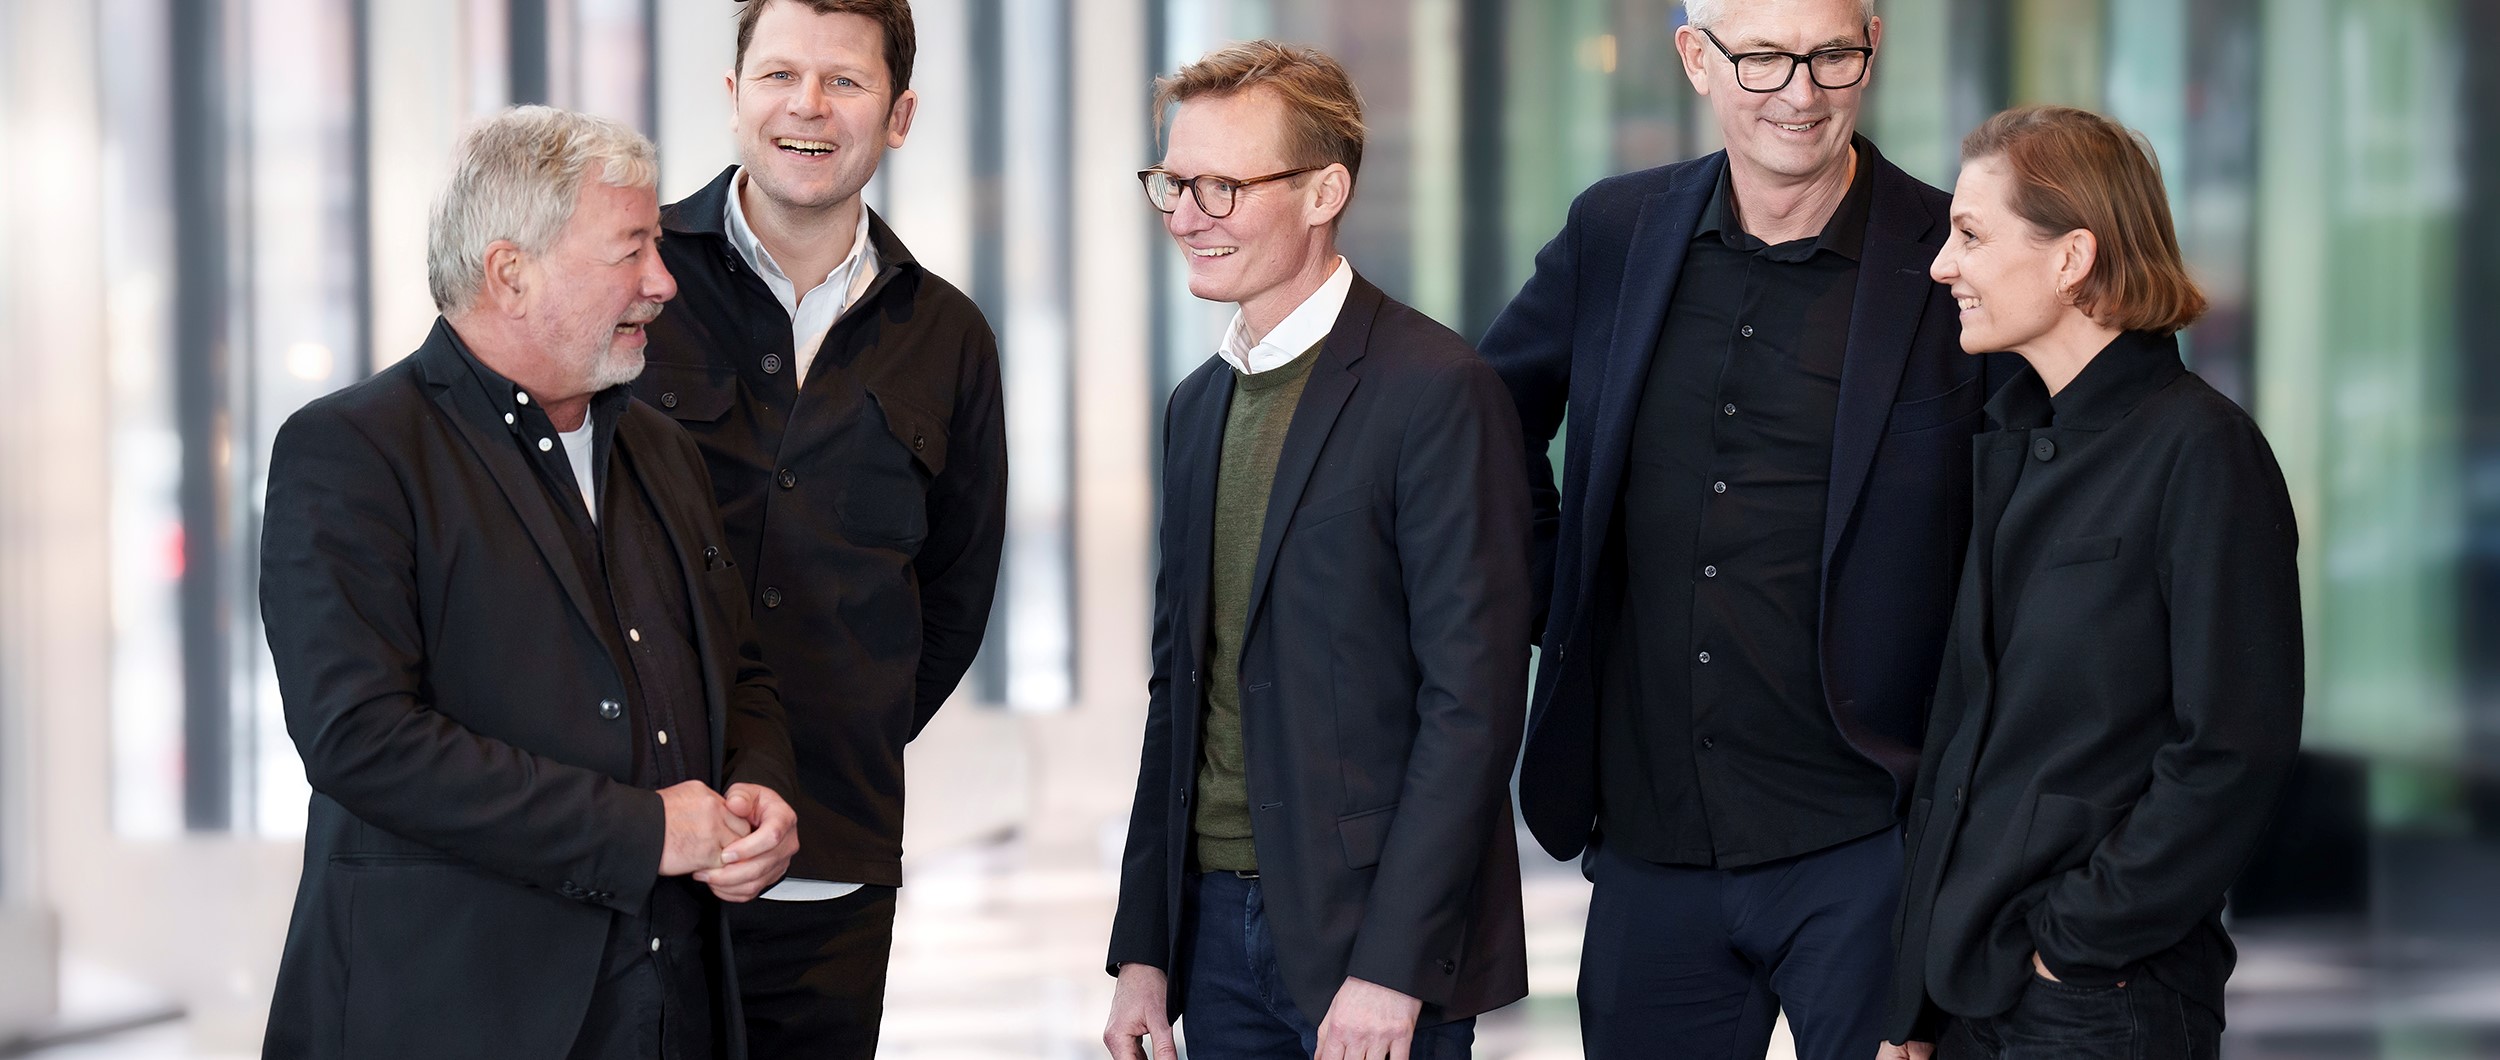 We are joining forces with RUBOW arkitekter and Nordic creating an even stronger architecture brand across Norway, Denmark and Iceland.